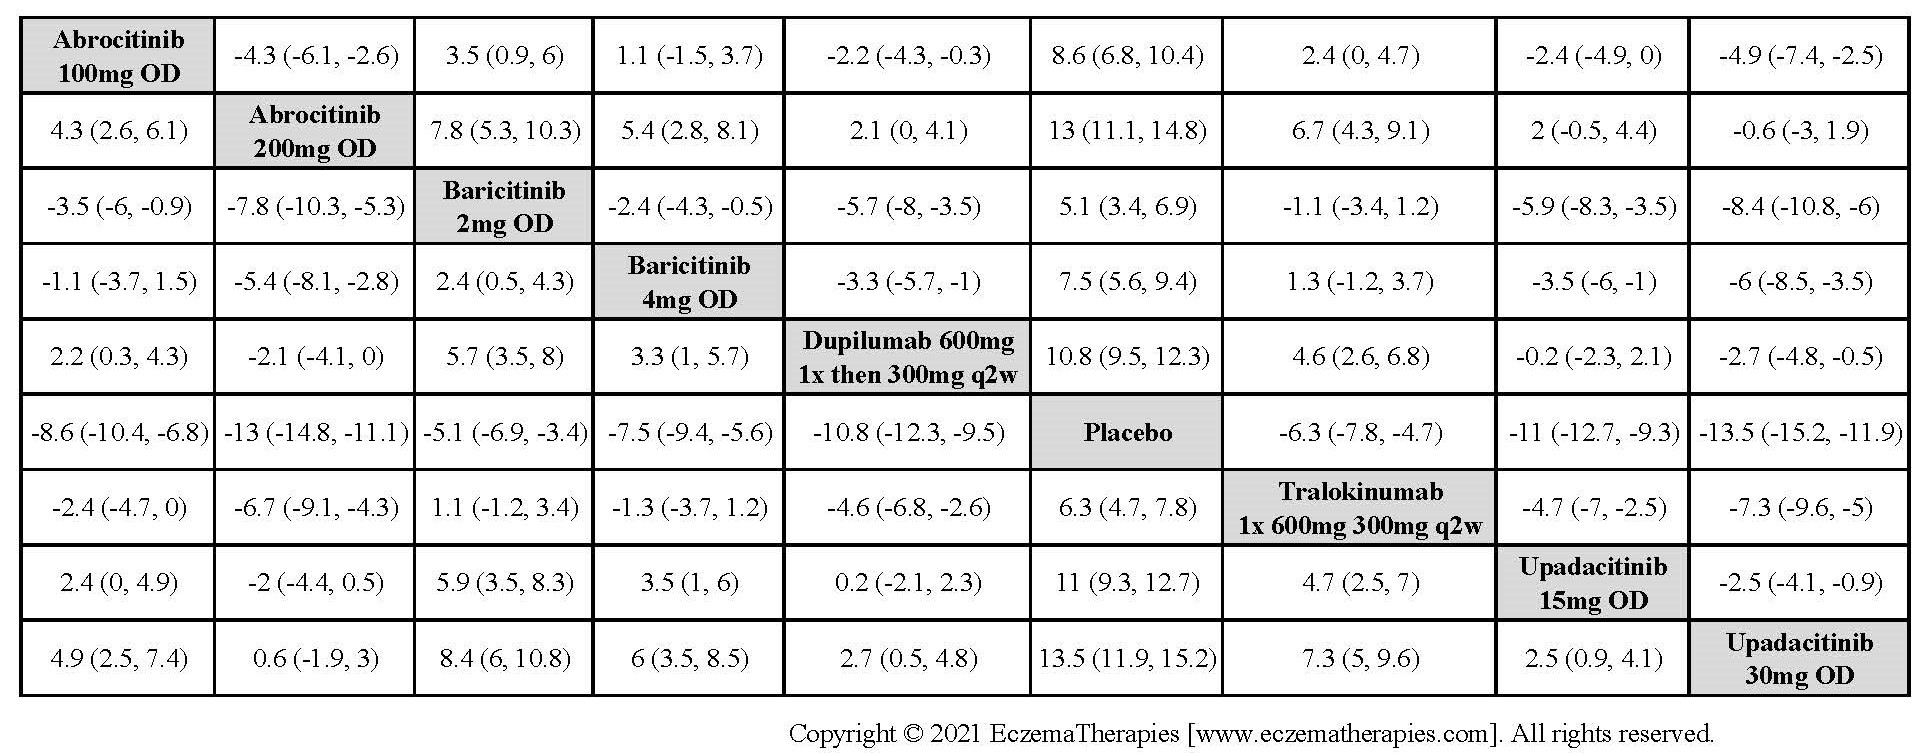 League table with relative effect estimates for change in EASI up to 16 weeks of treatment for selected medications and placebo in adults